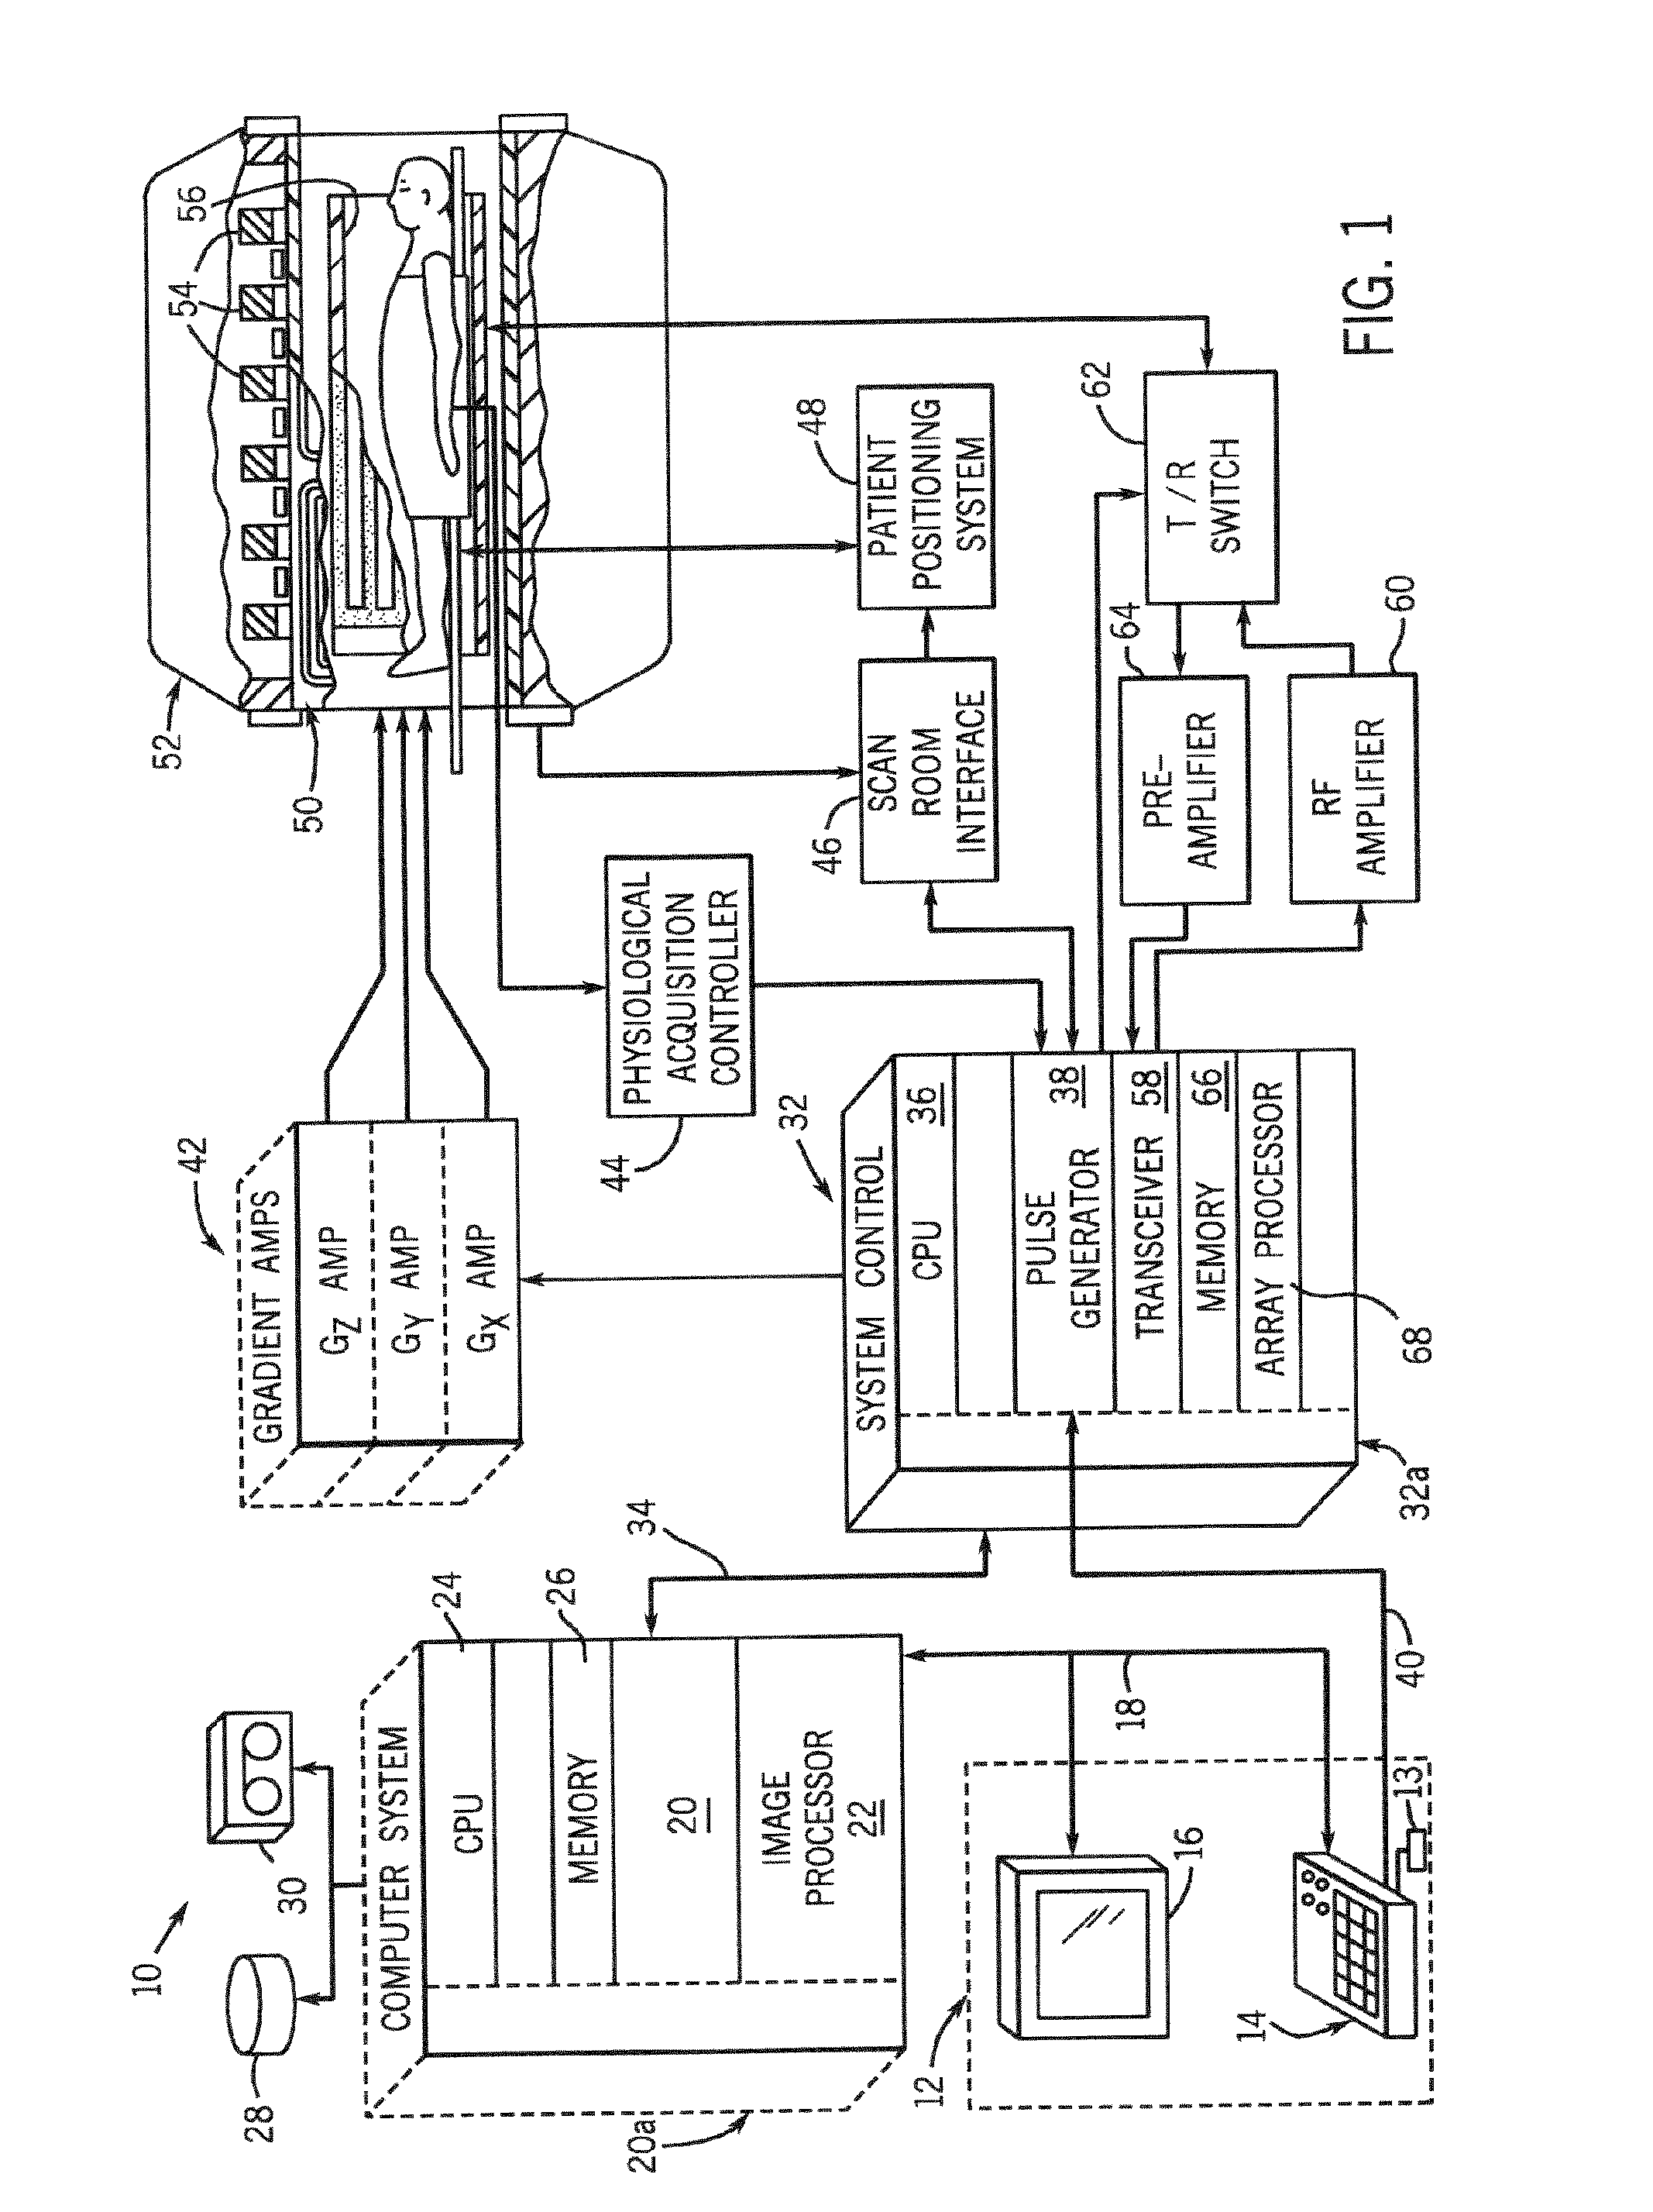 RF body coil with acoustic isolation of conductors